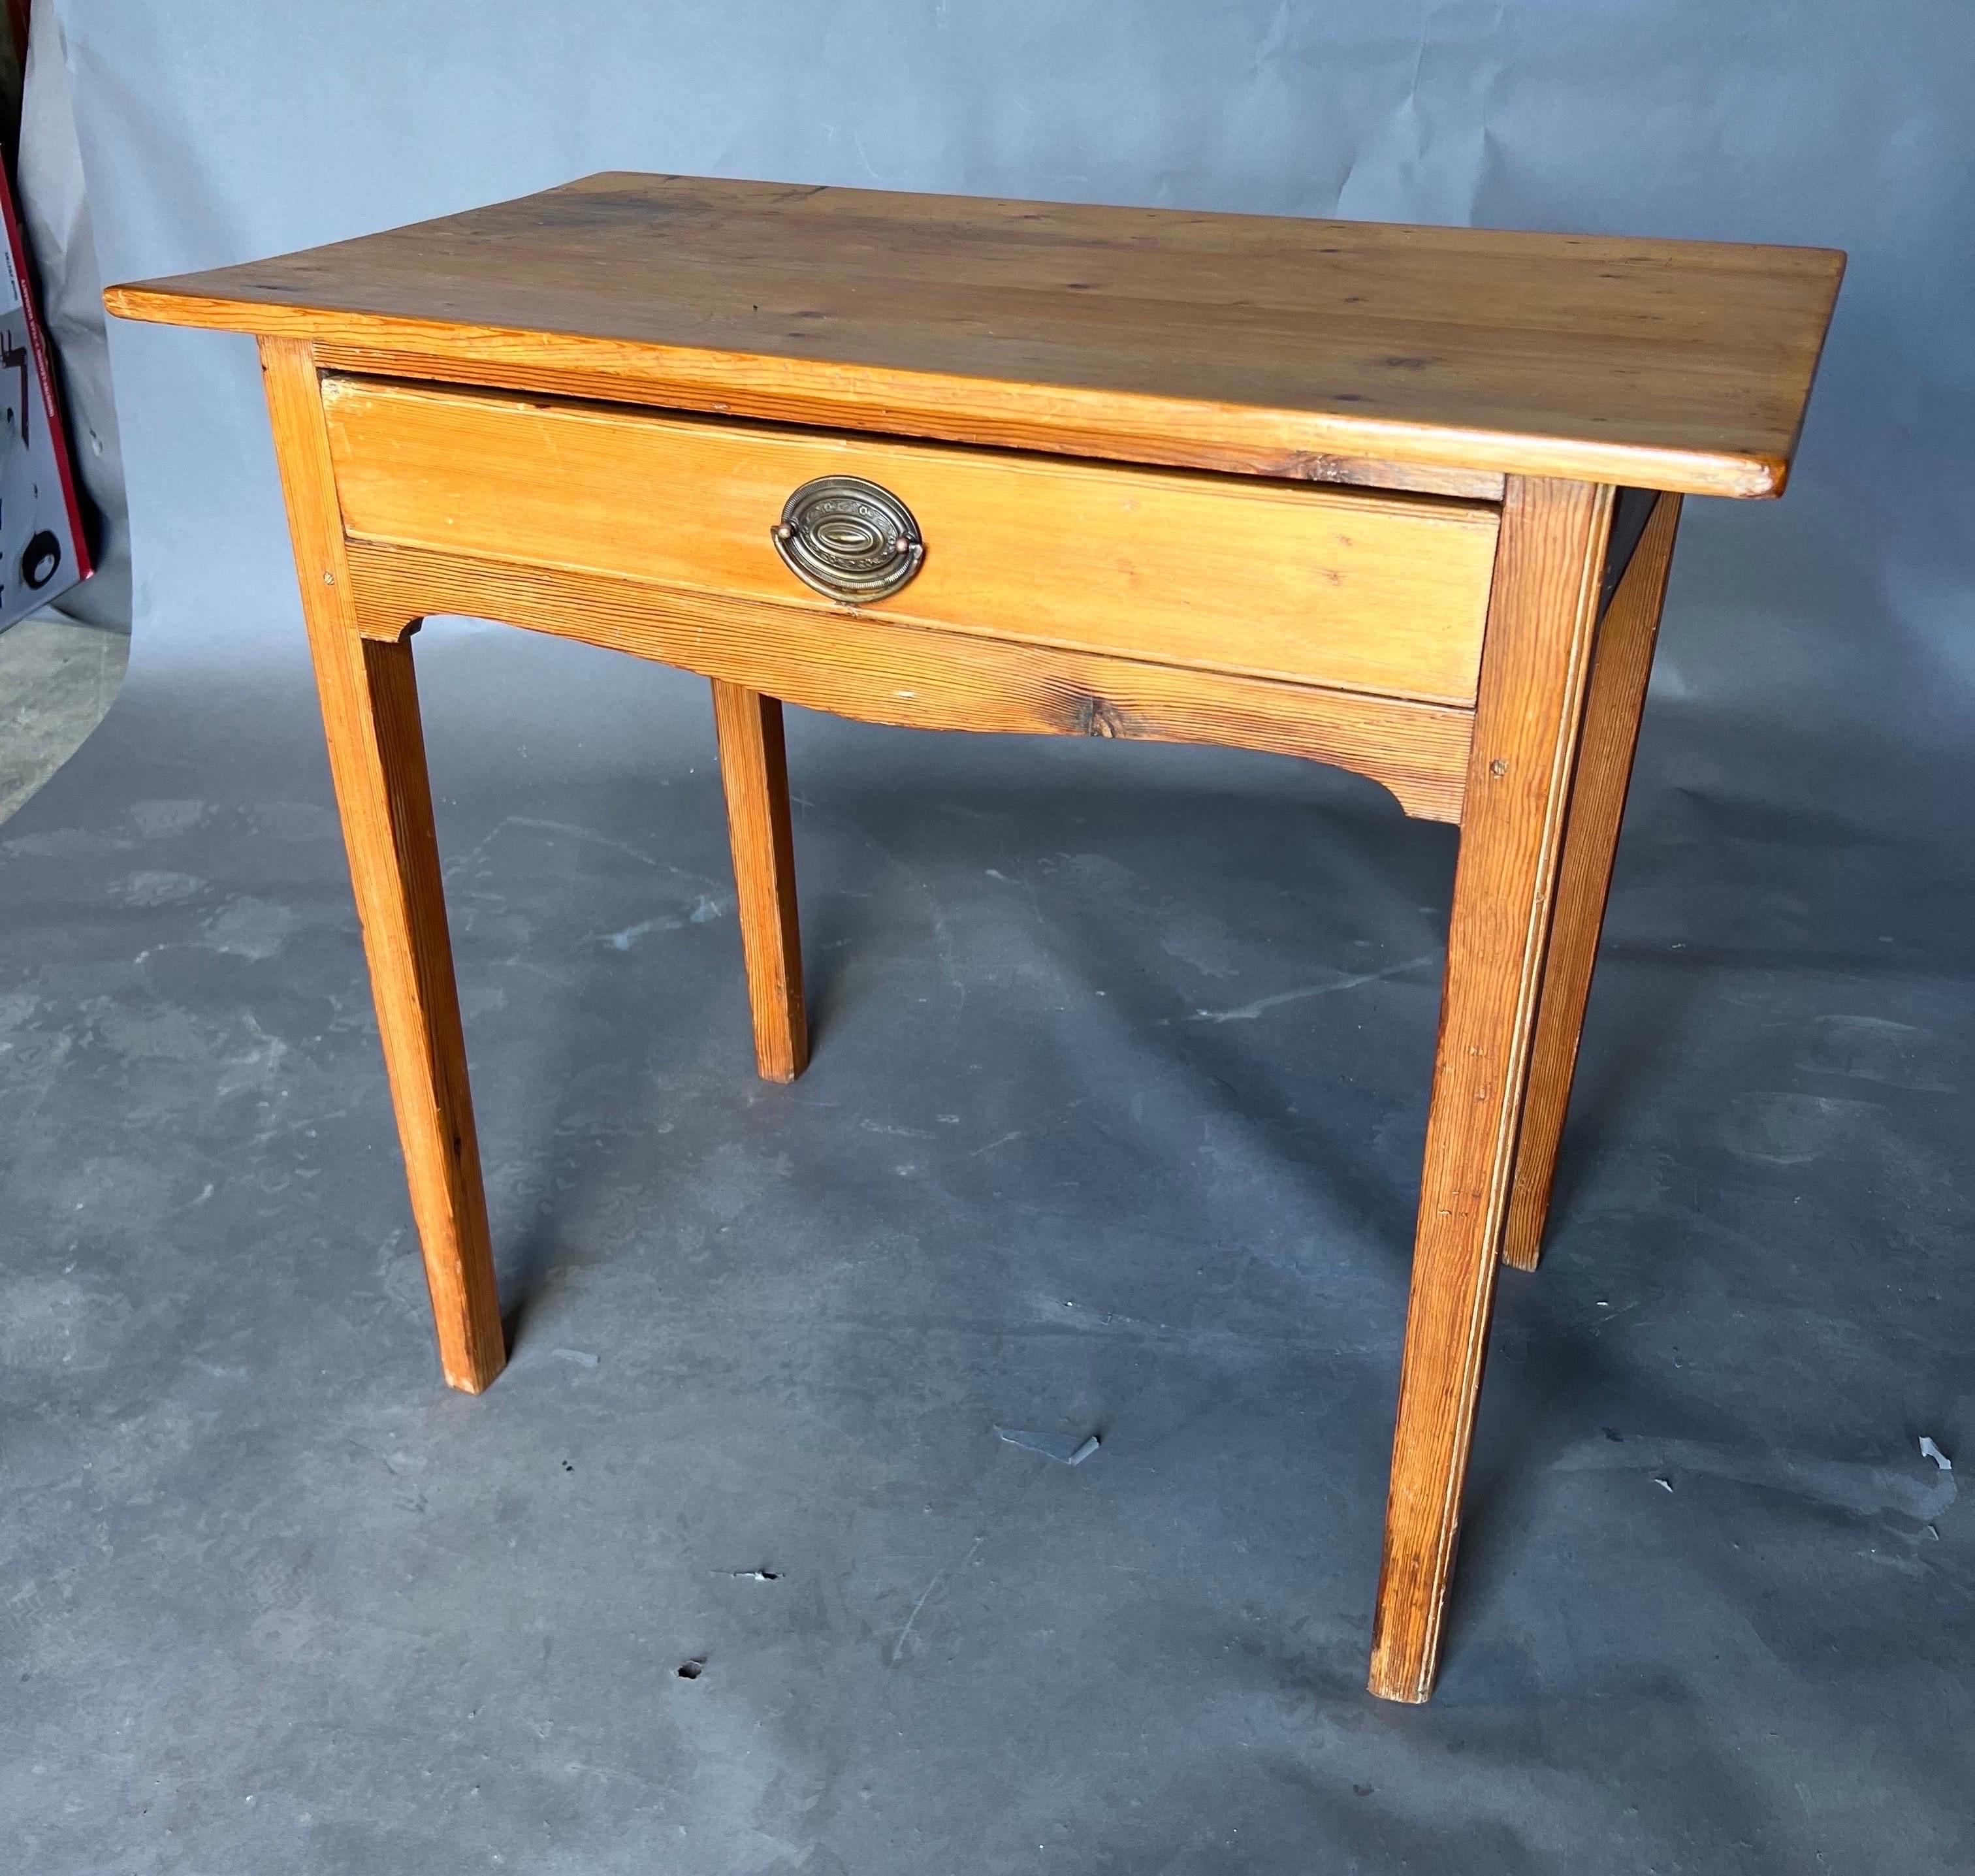 18th century American yellow pine single drawer side table, likely Southern or from PA. Nice beaded legs, pegged construction and shaped drawer apron. 